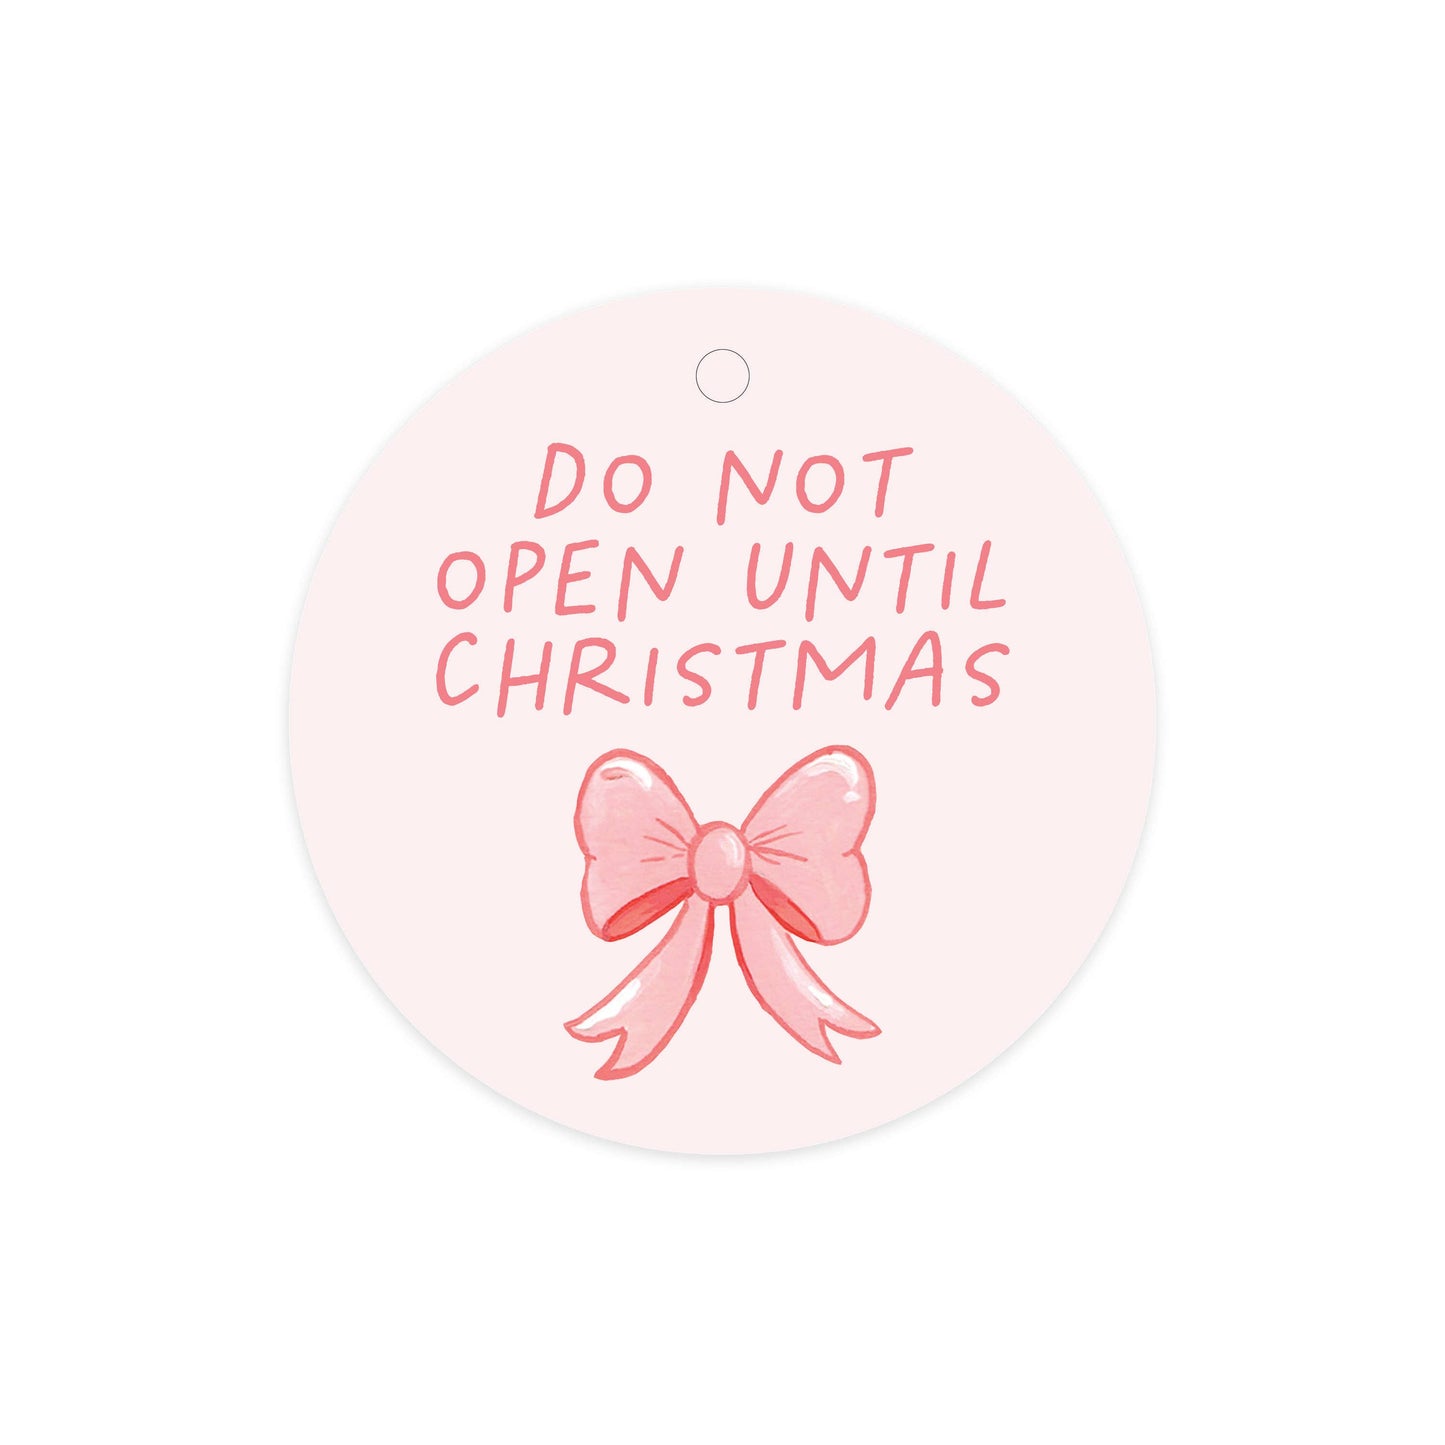 Do Not Open Until Christmas Circle Gift Tags